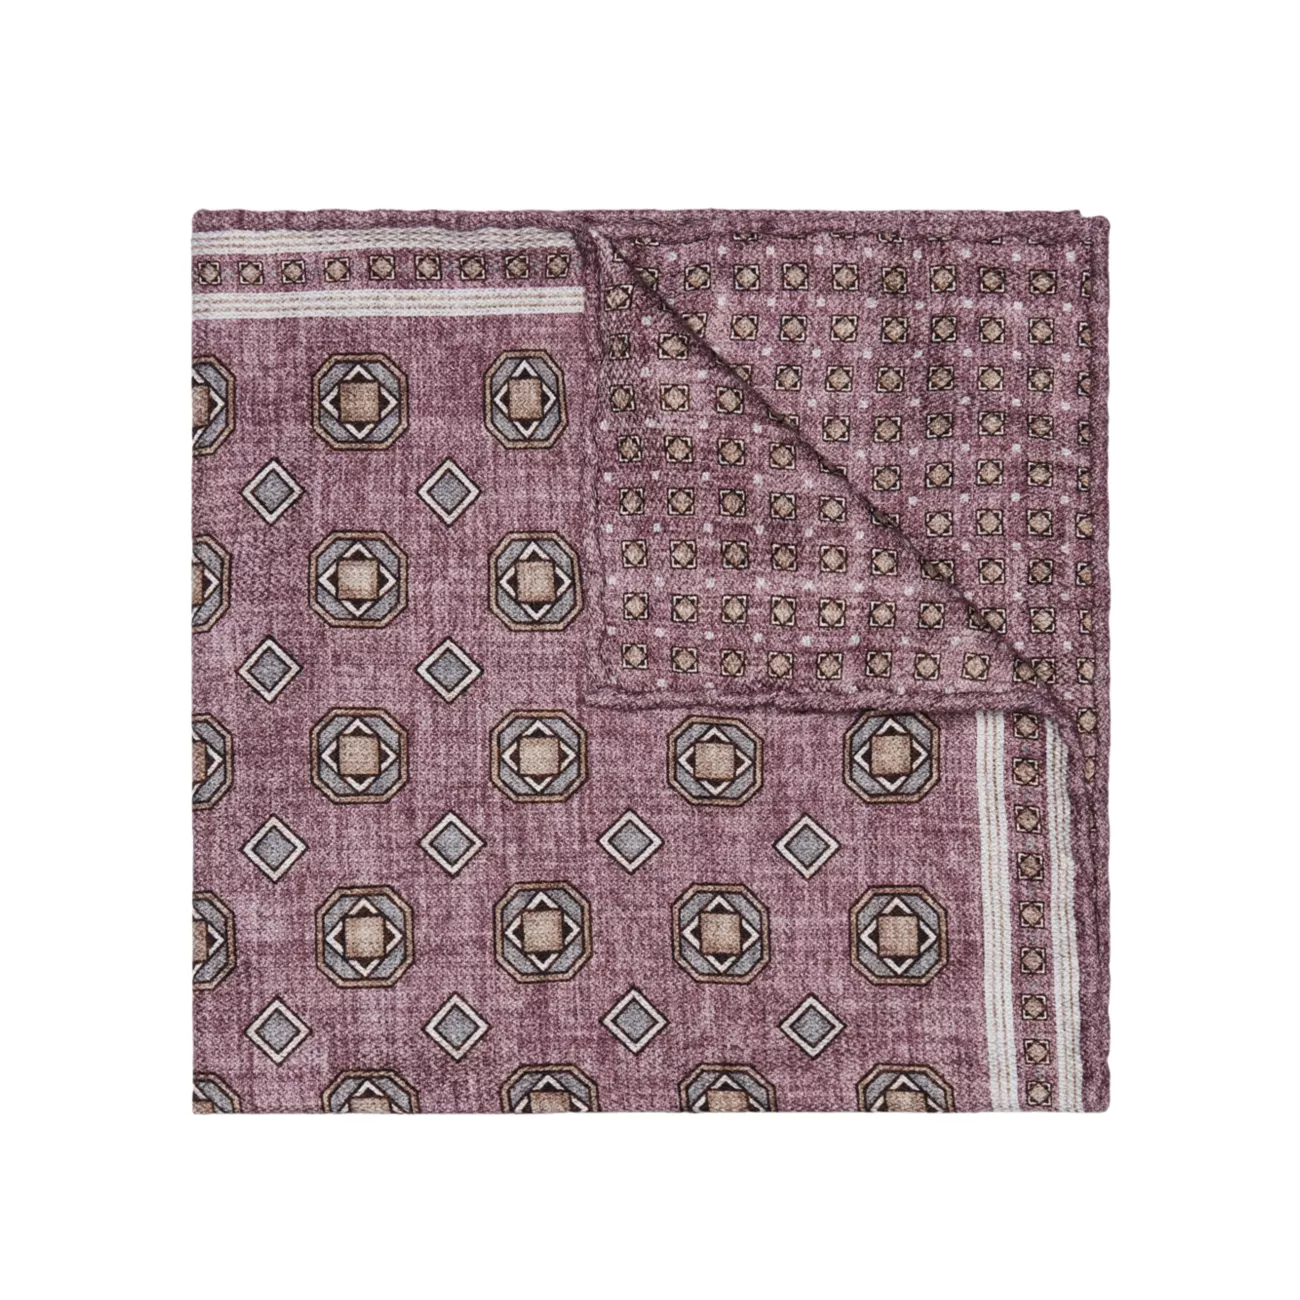 Double Face Silk Pocket Square With Geometric Pattern Brunello Cucinelli